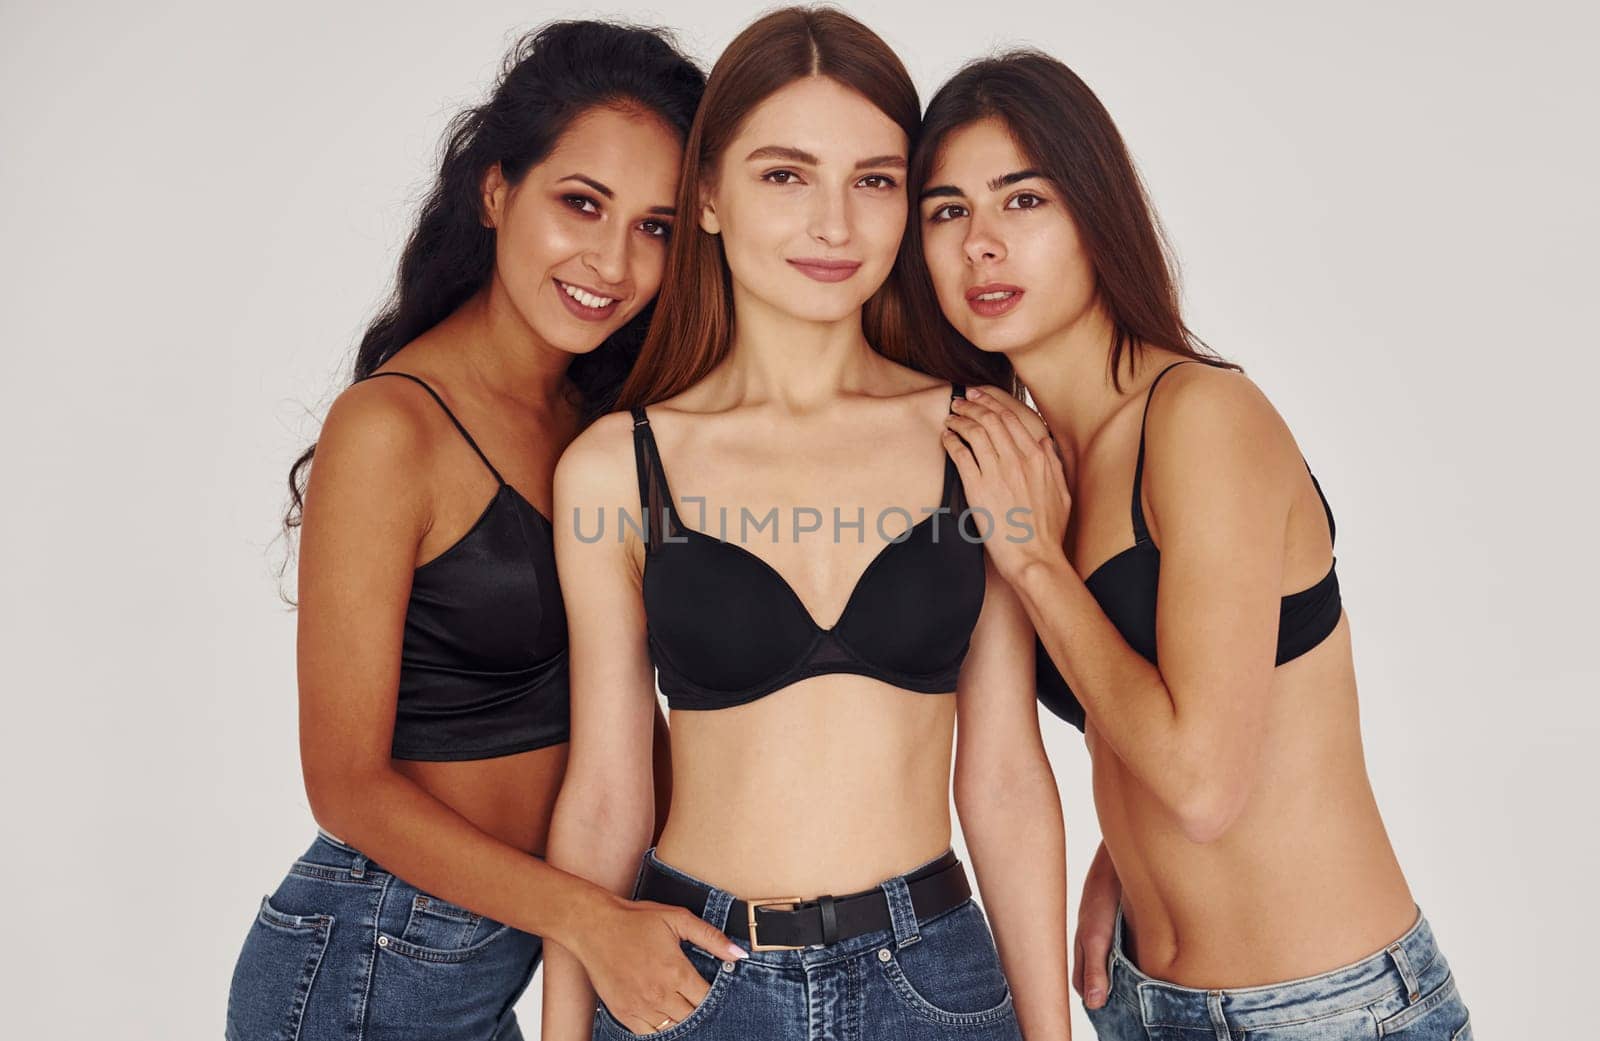 Embracing each other. Three young women in lingerie together indoors. White background by Standret